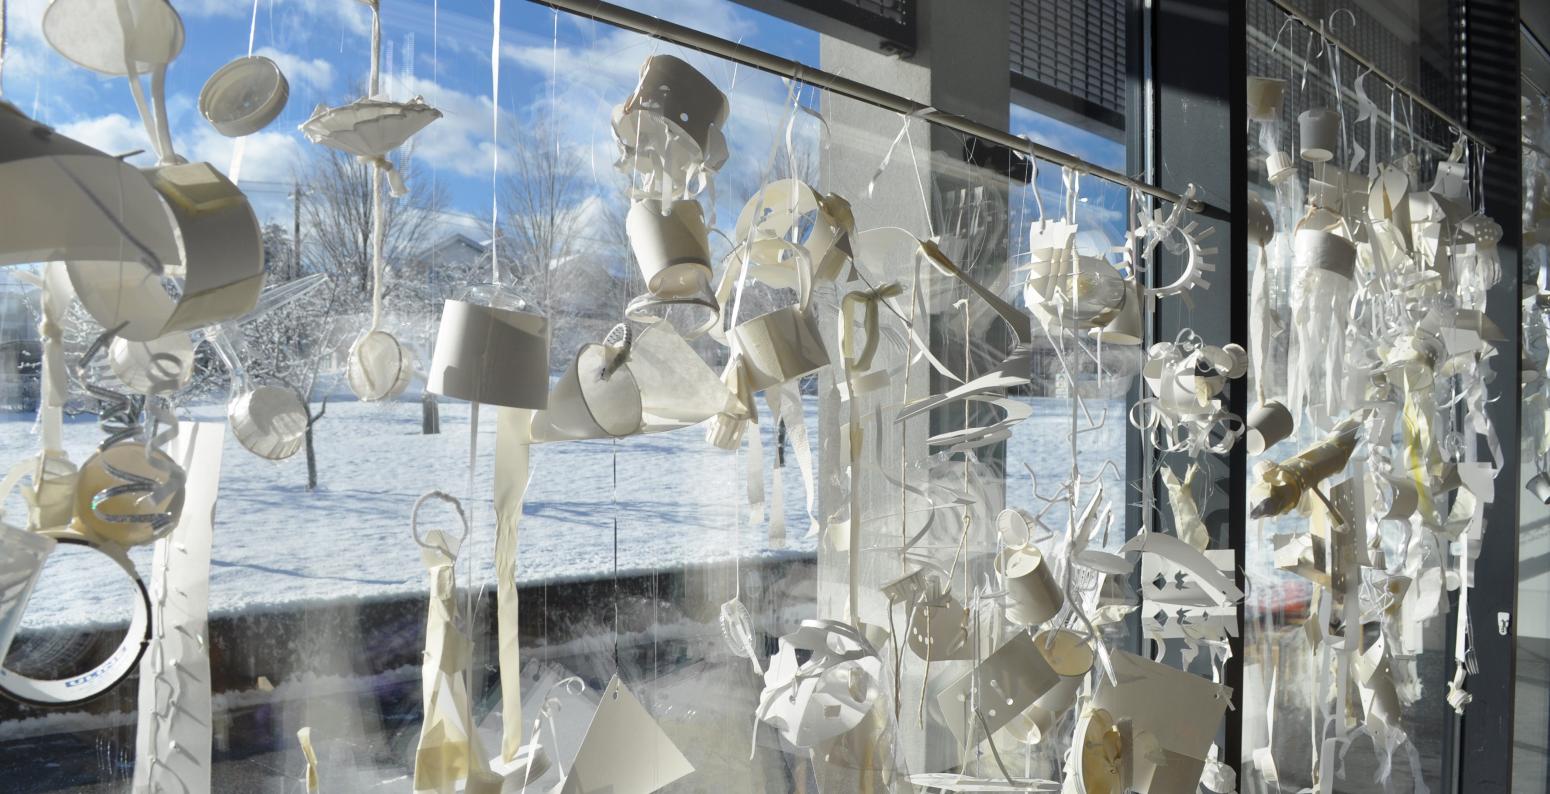 A window filled with white mobiles with a snowy day outside.